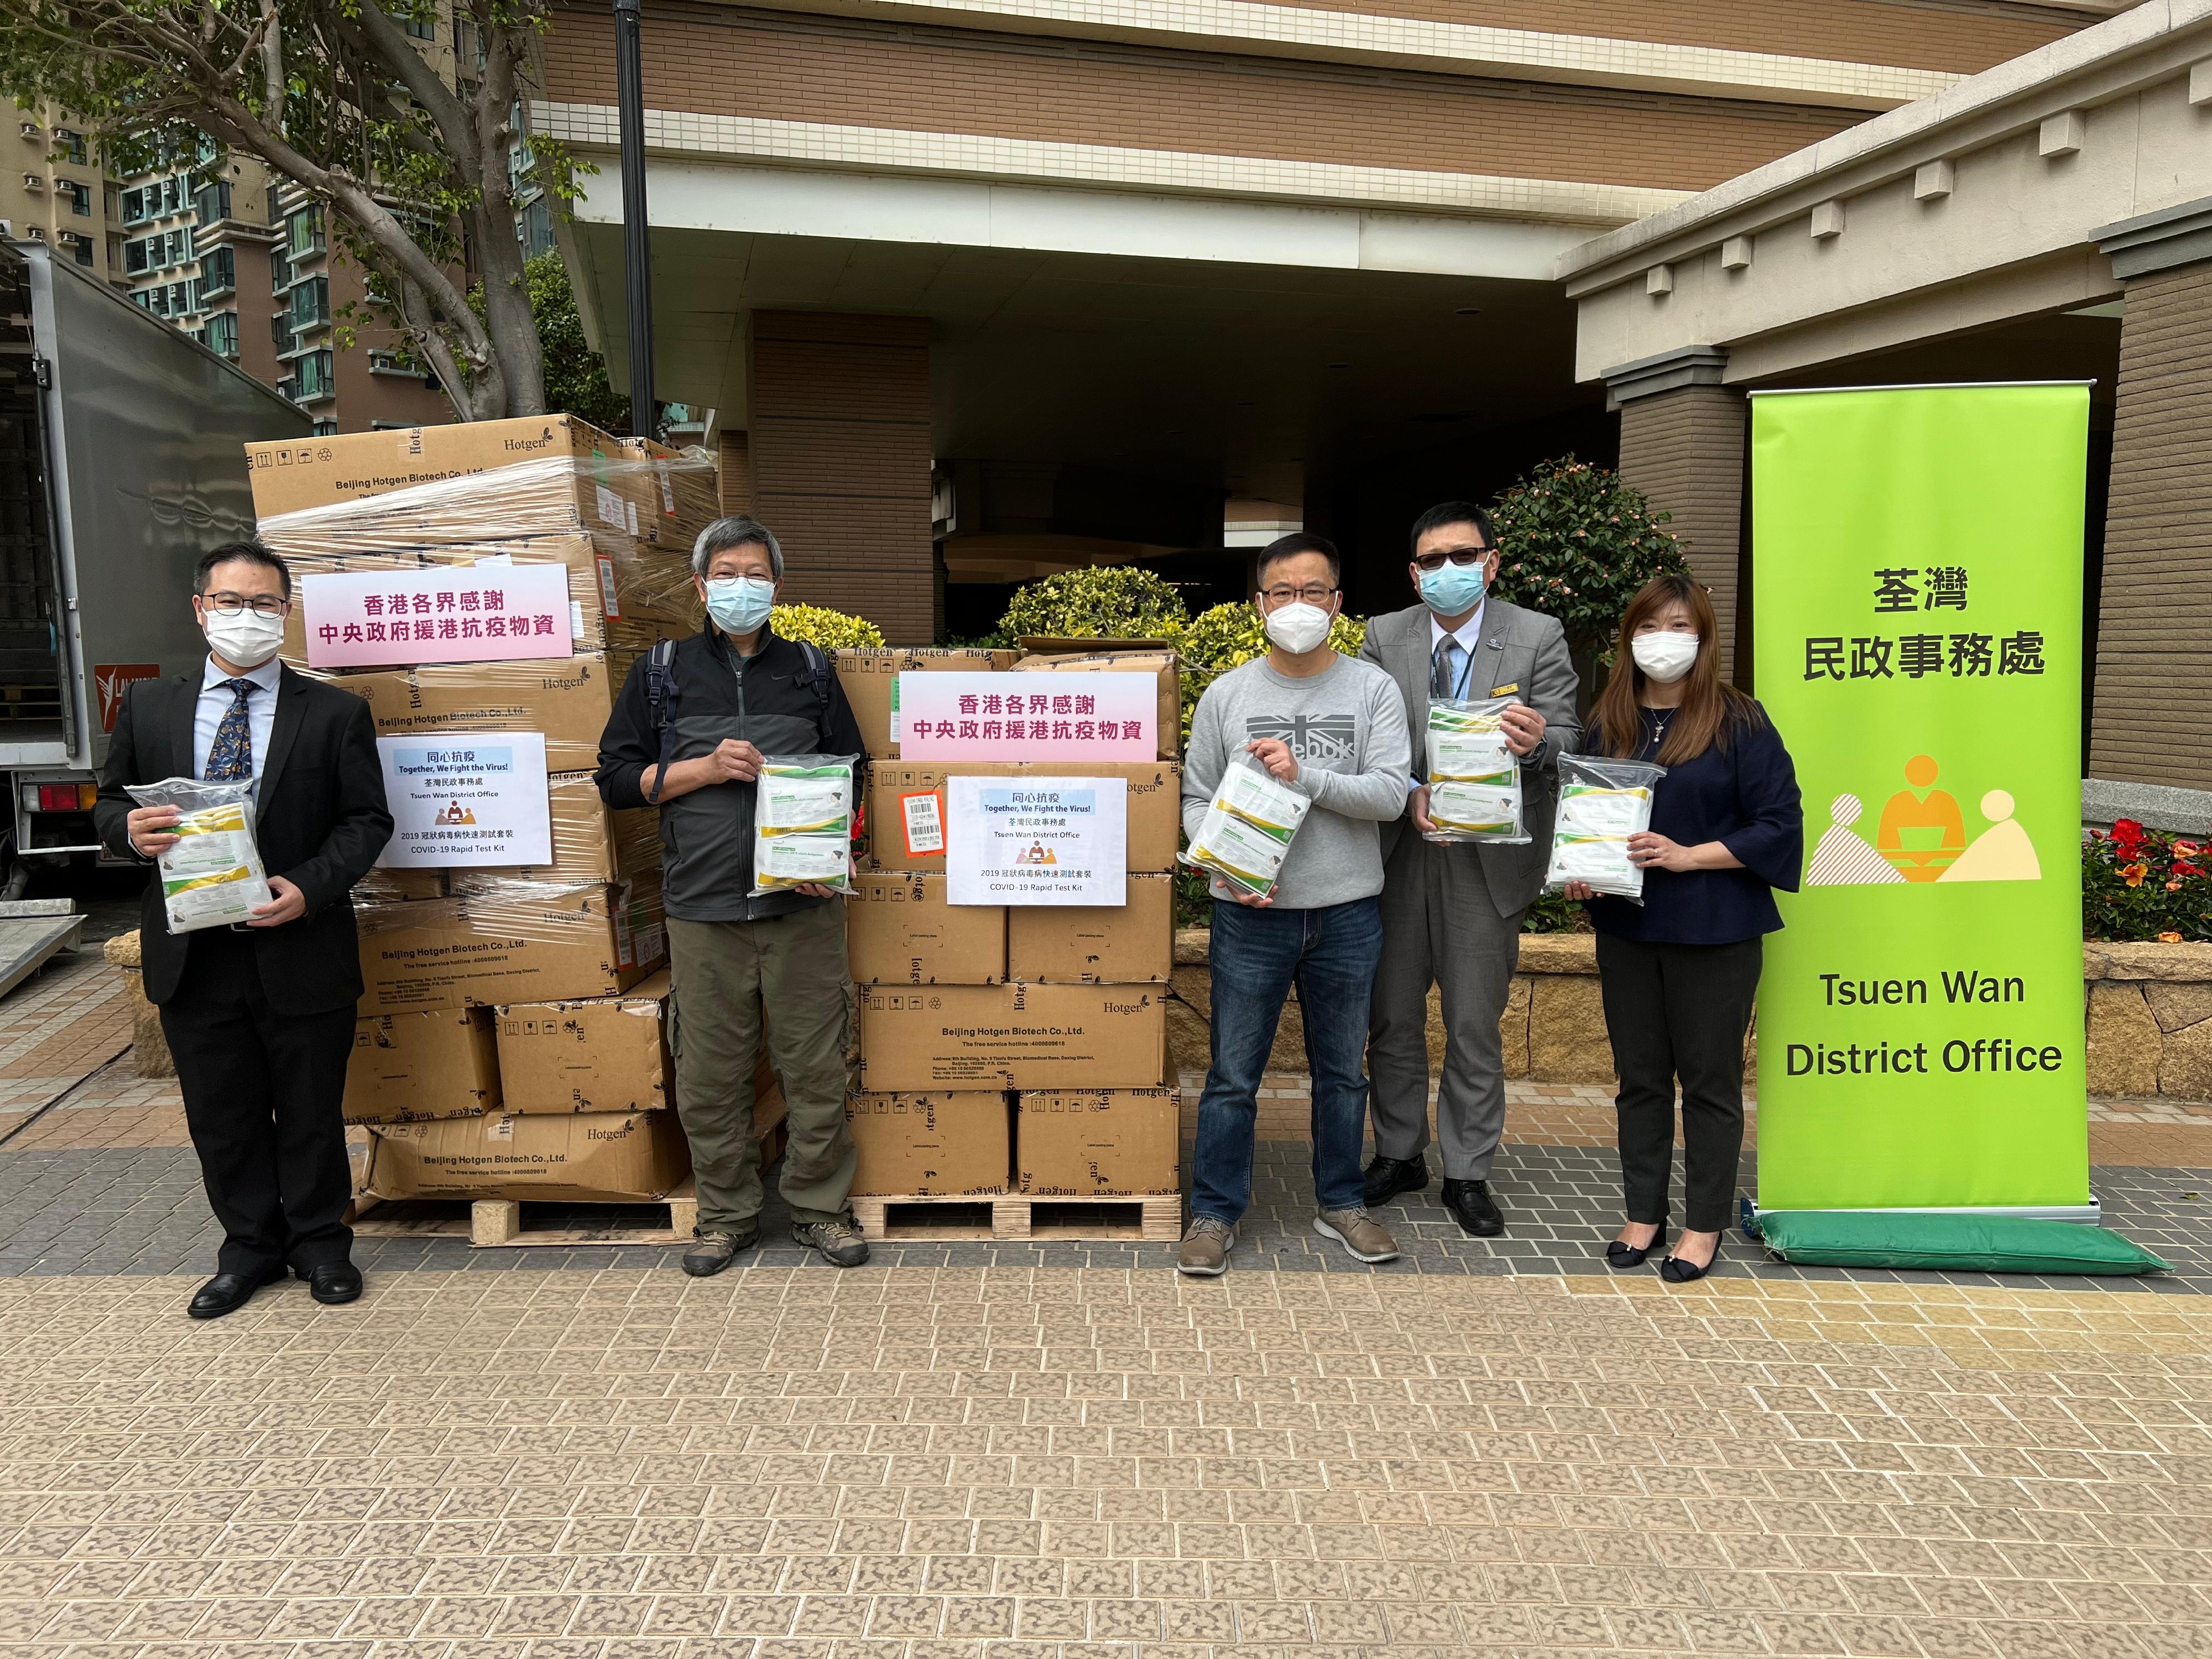 The Tsuen Wan District Office distributed COVID-19 rapid test kits to households, cleansing workers and property management staff living and working in Park Island for voluntary testing through the property management company.